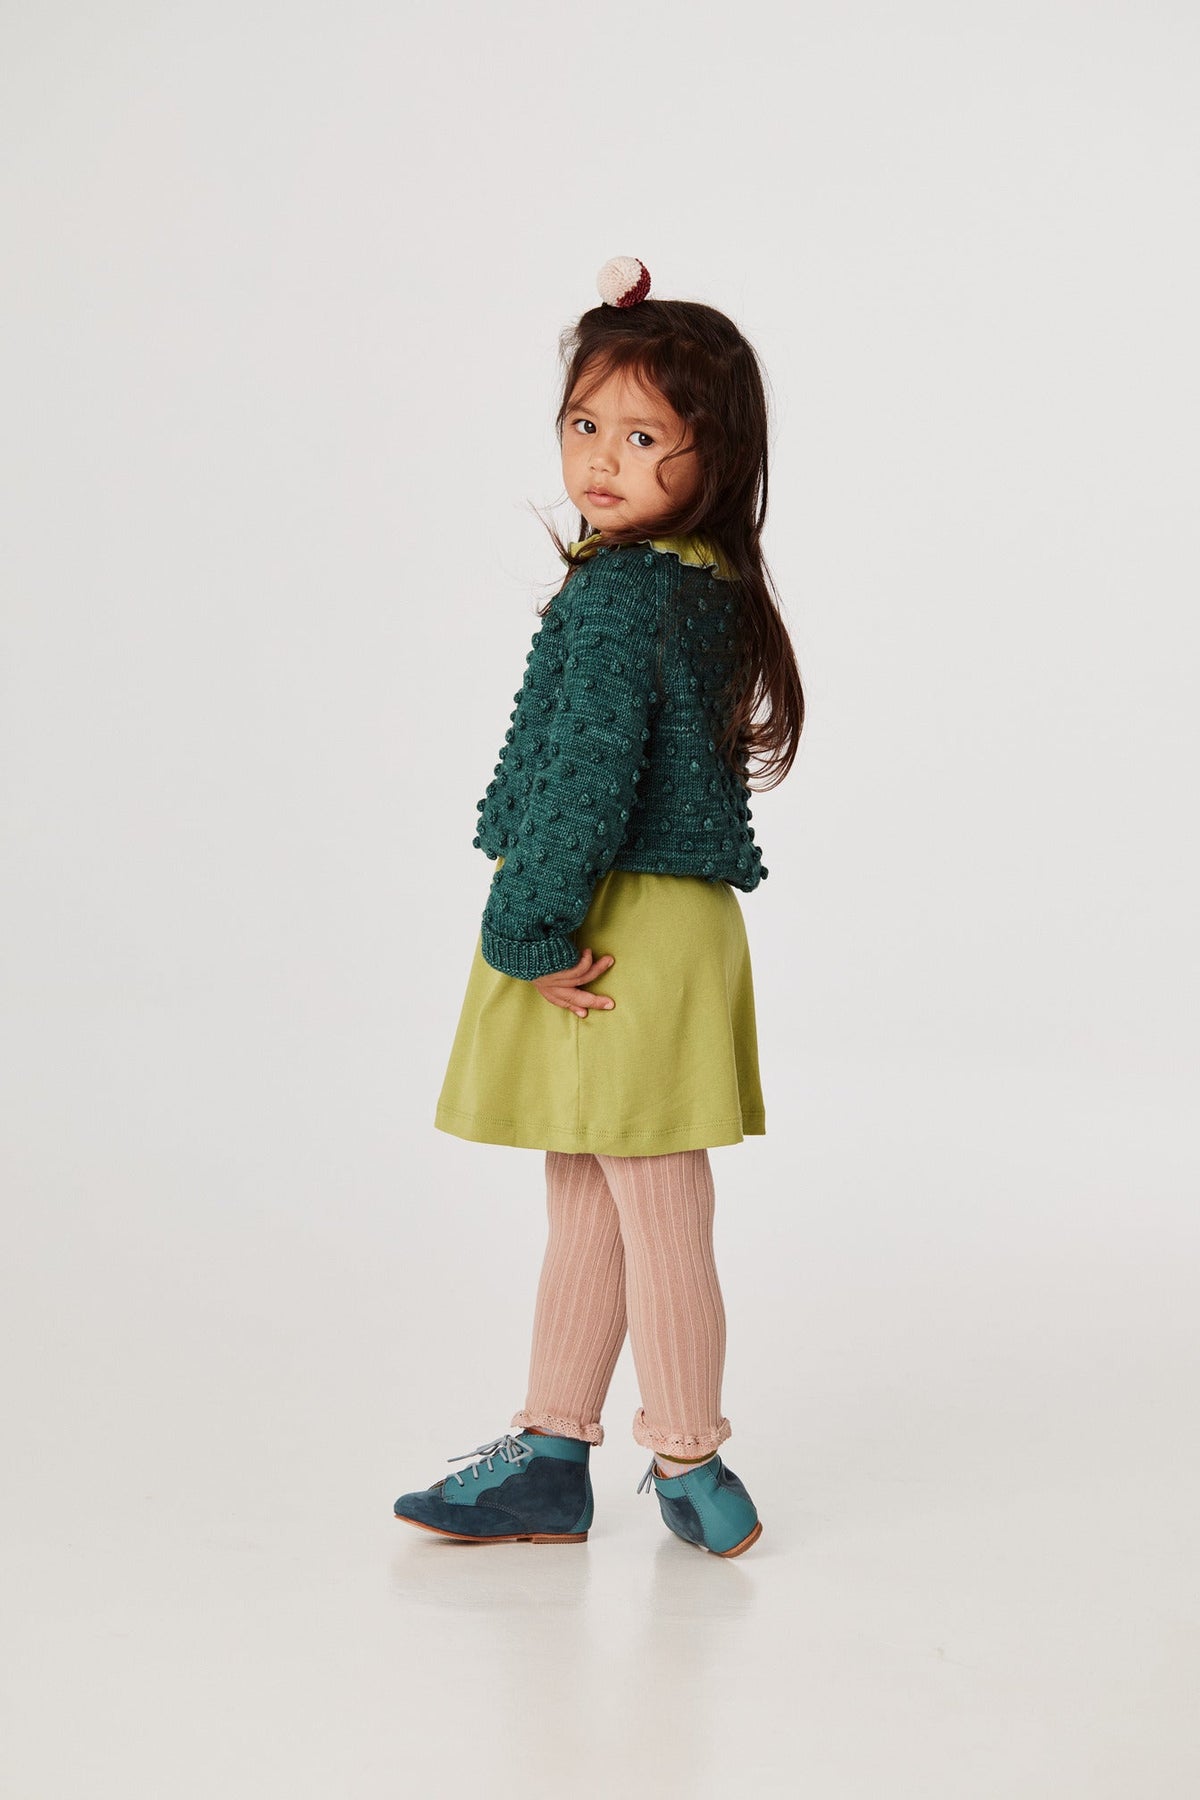 Popcorn Sweater - Peacock+Model is 41 inches tall, 38lbs, wearing a size 4-5y